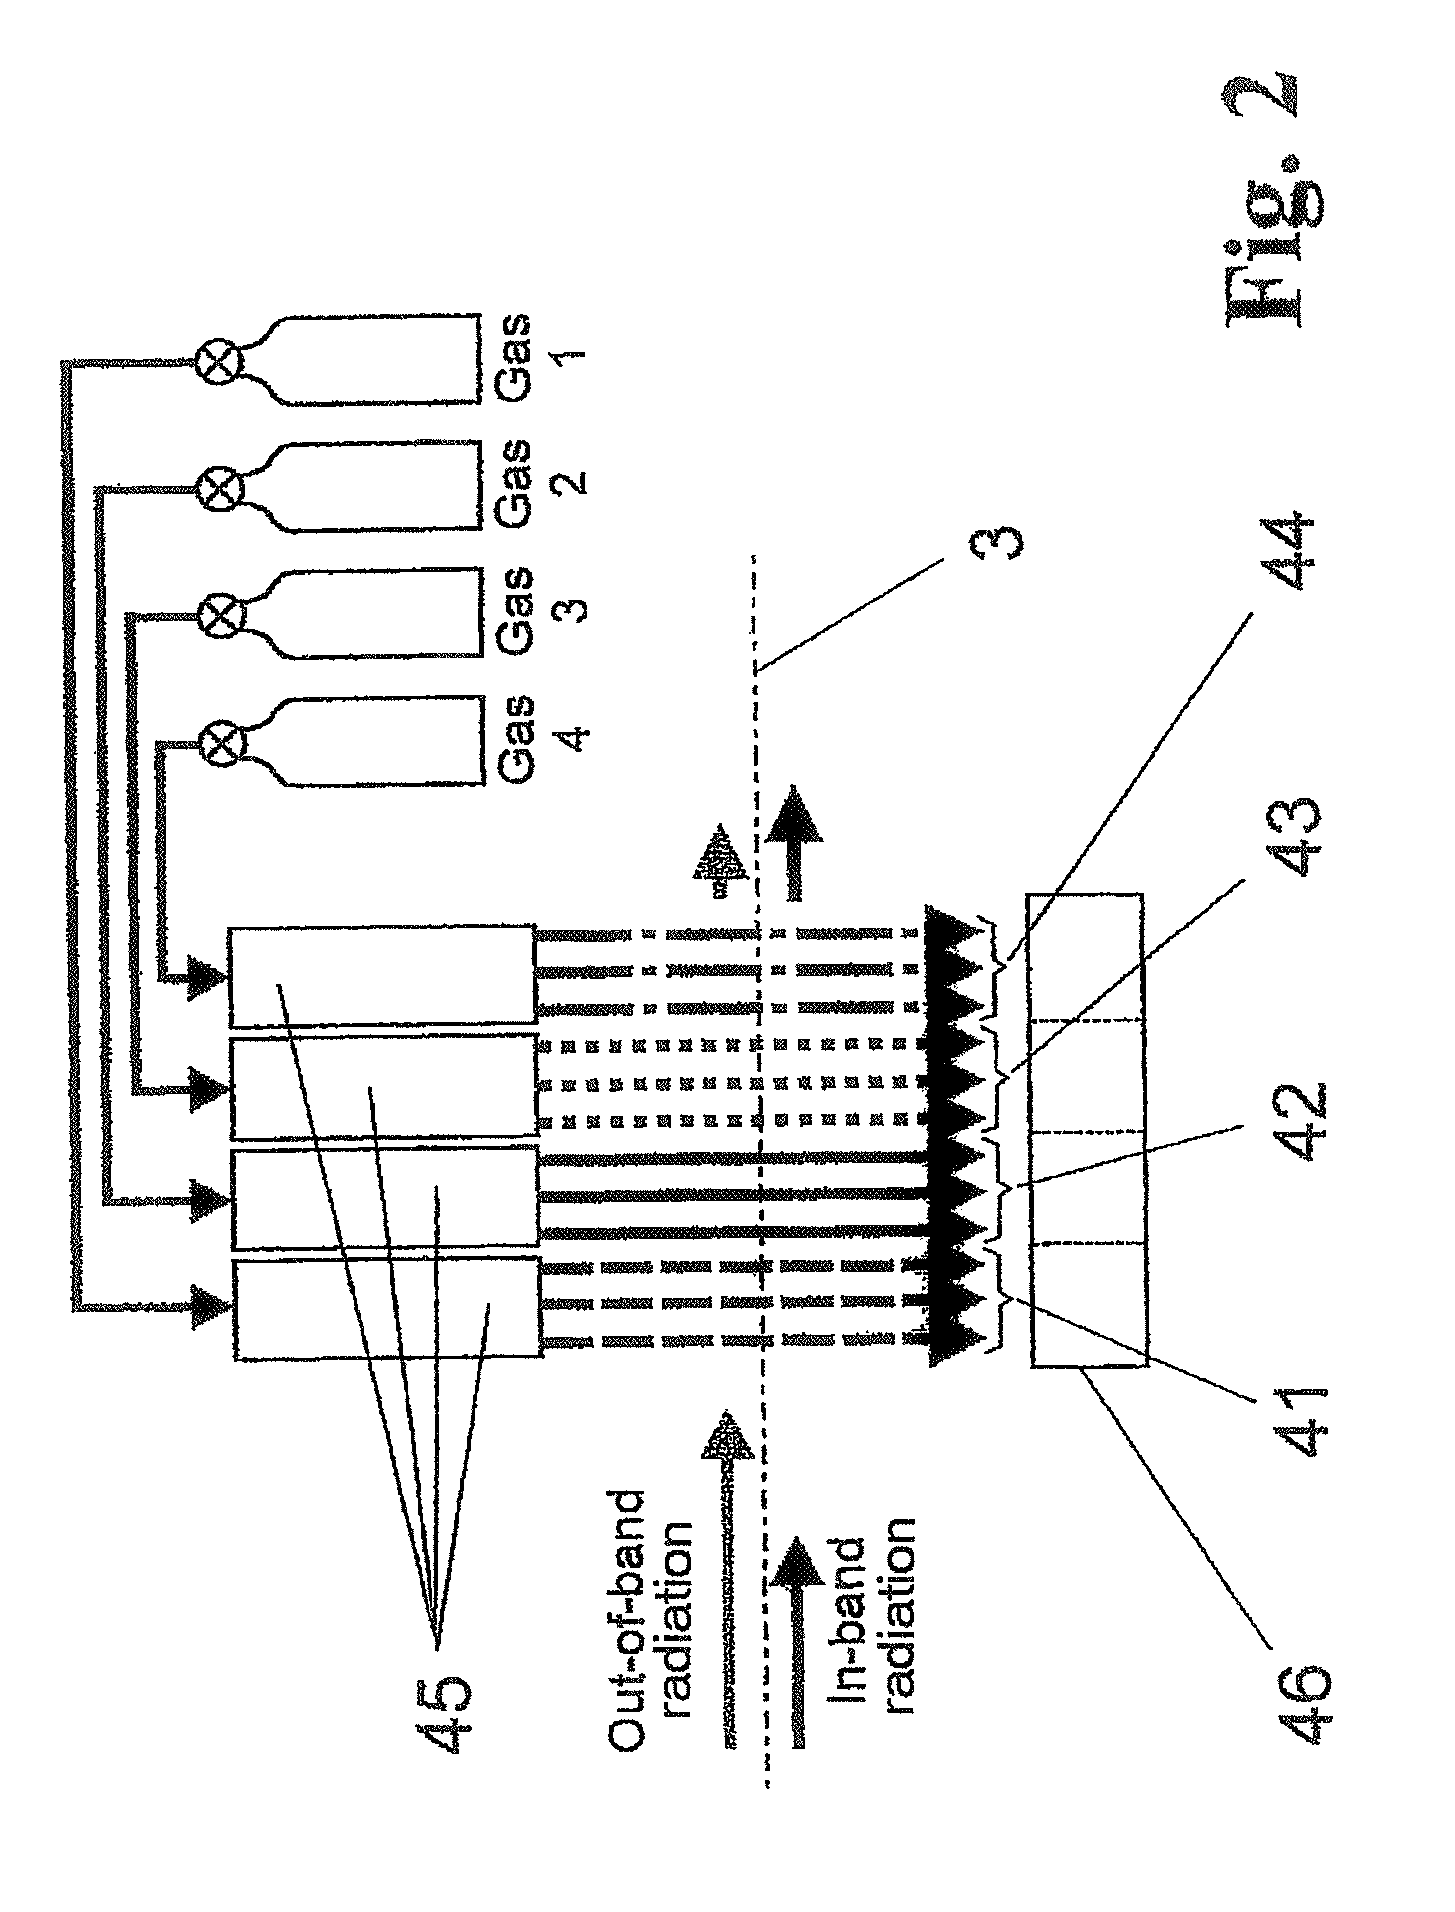 Arrangement for the suppression of unwanted spectral components in a plasma-based EUV radiation source